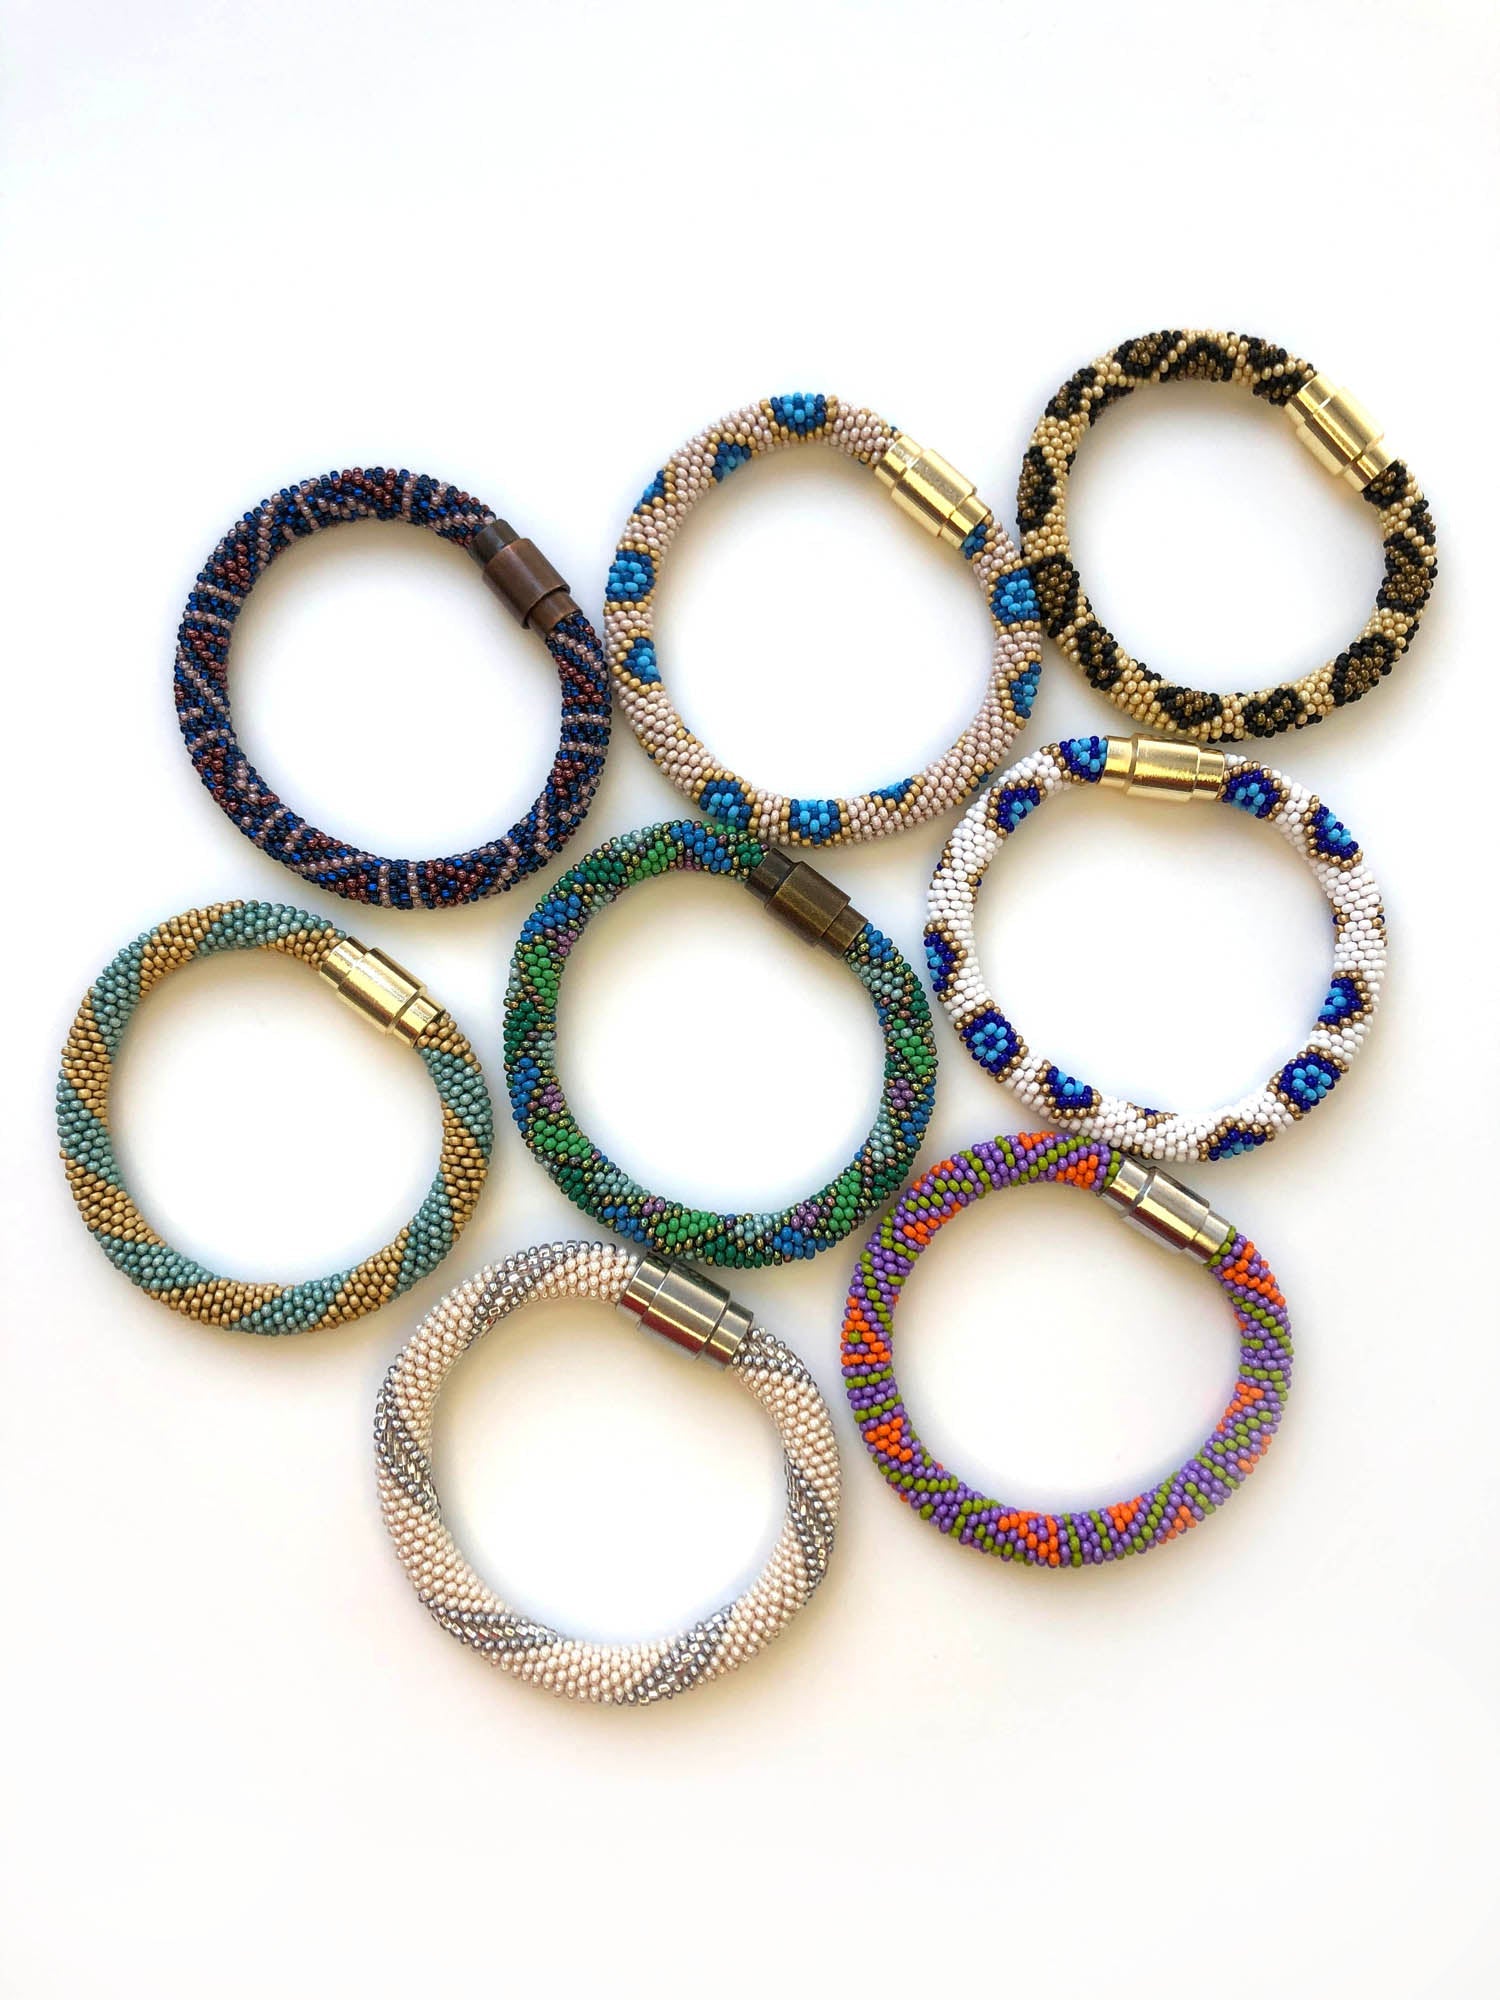 Variety of different colored bracelets with magnetic closures.